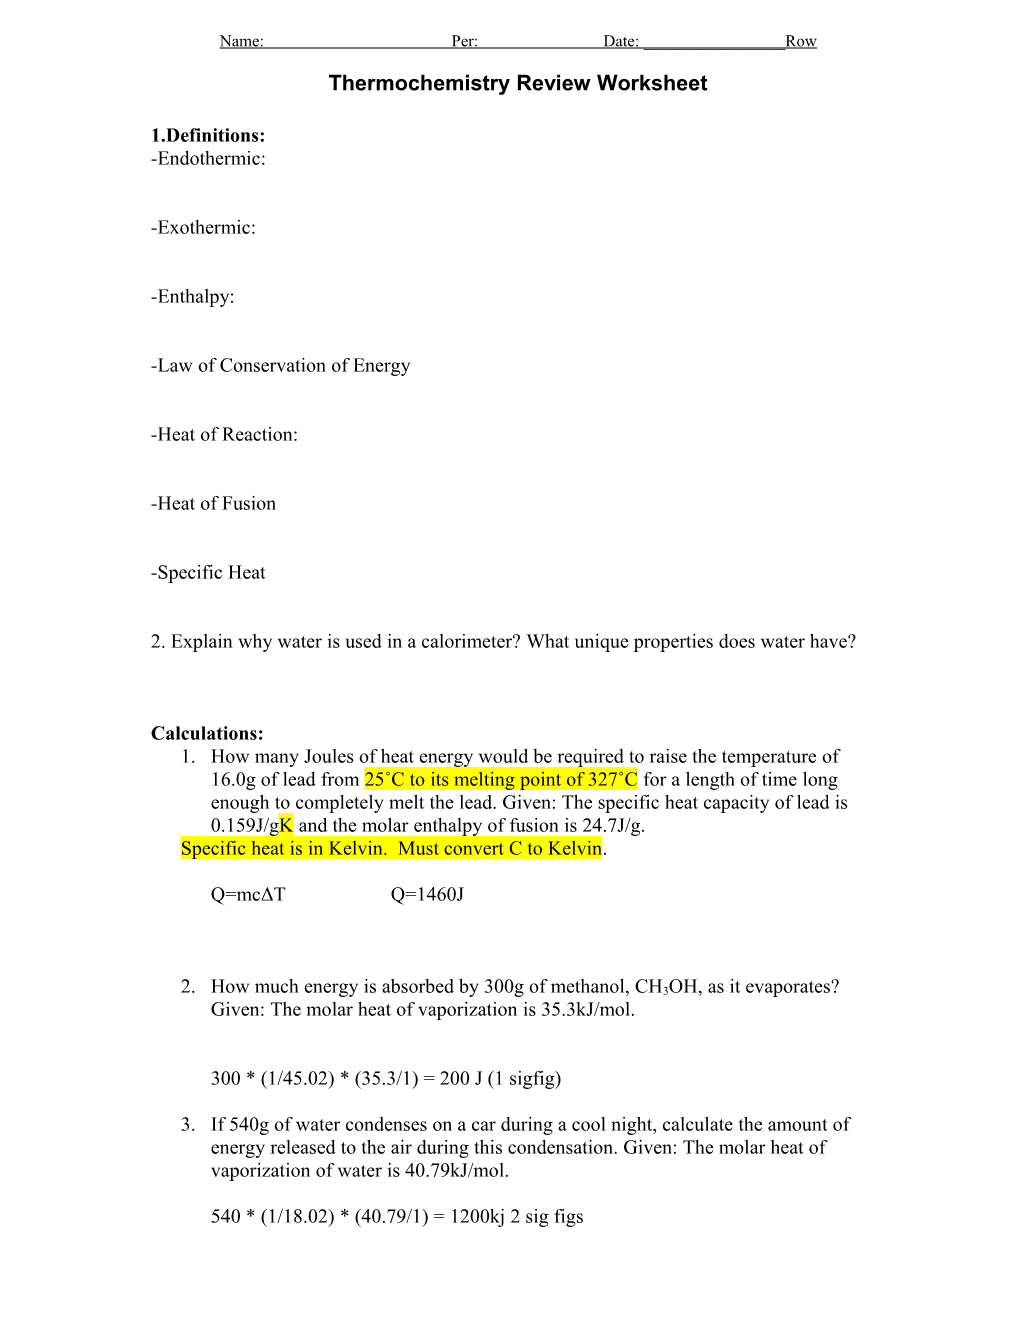 Thermochemistry Review Worksheet